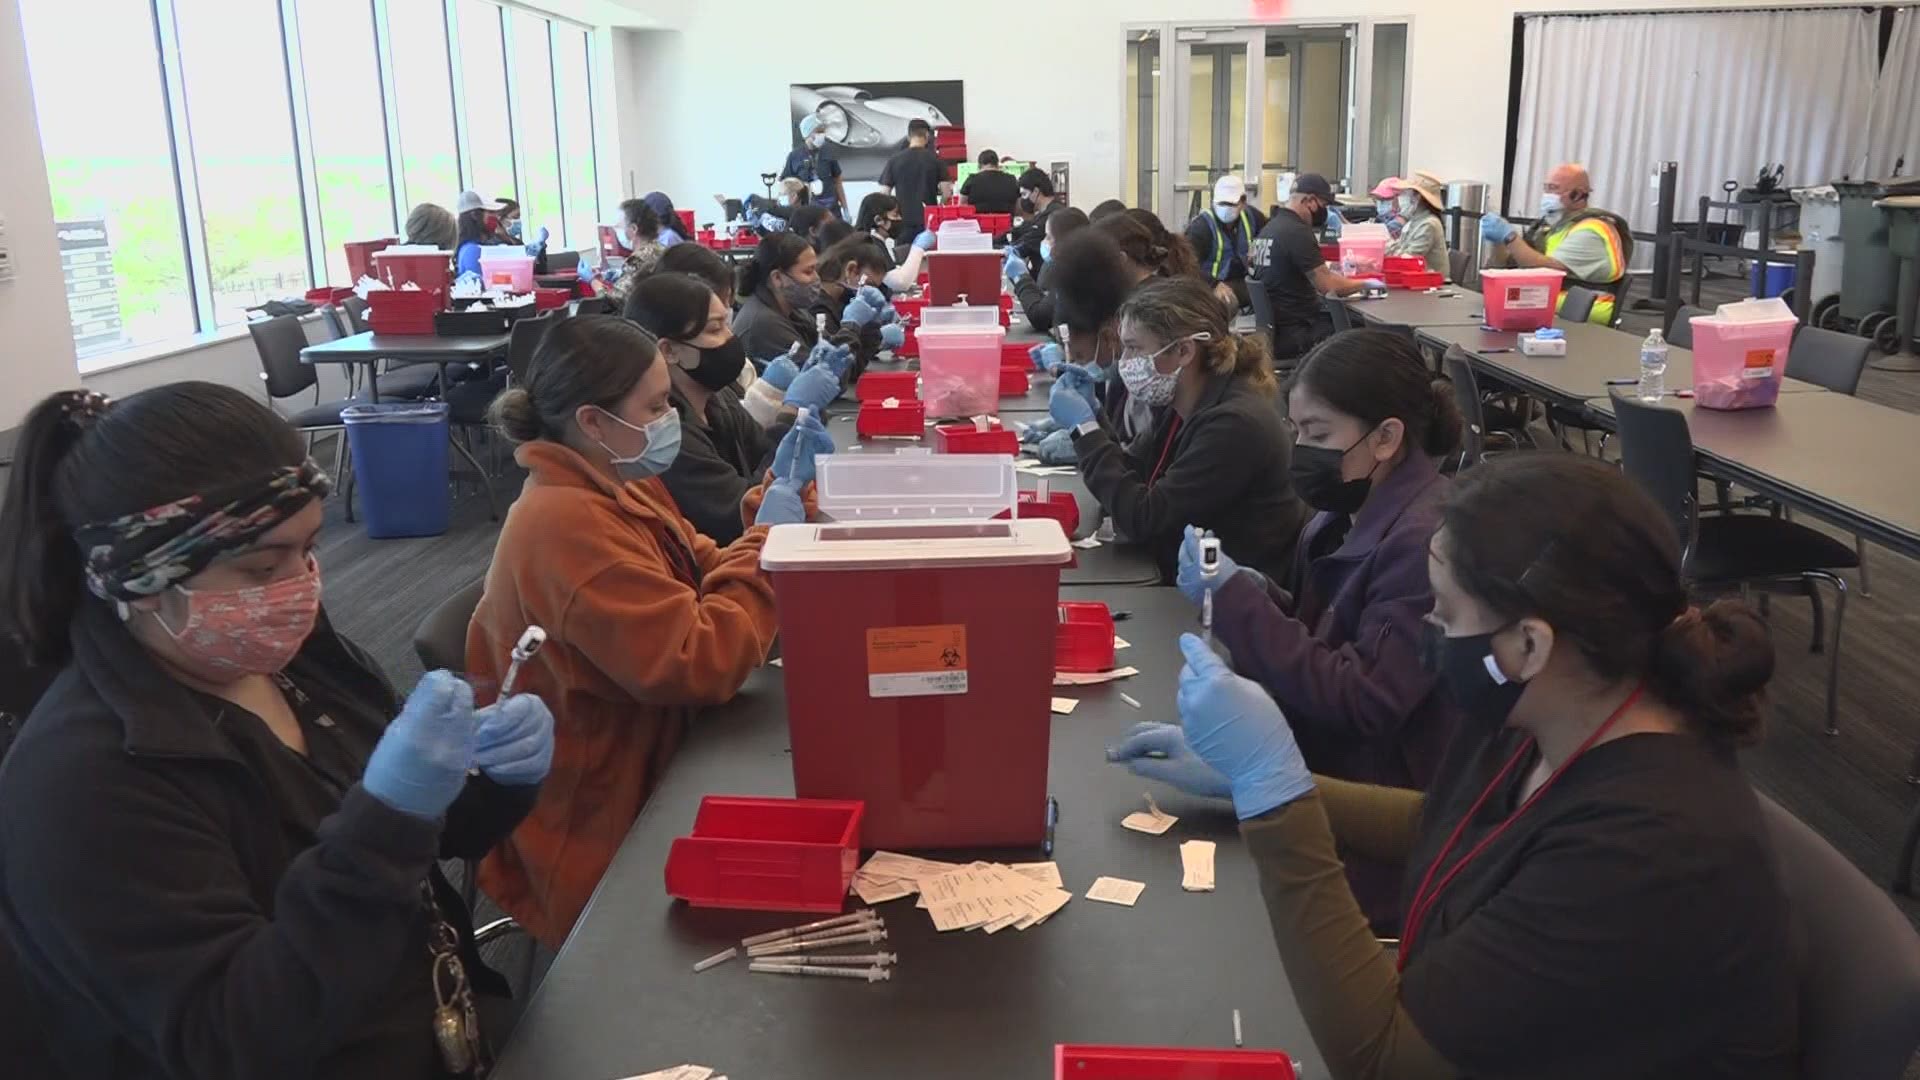 Travis County's COTA vaccination site is handing out more than vaccines and giving opportunities for some hands on experience to some Del Valle HS students.